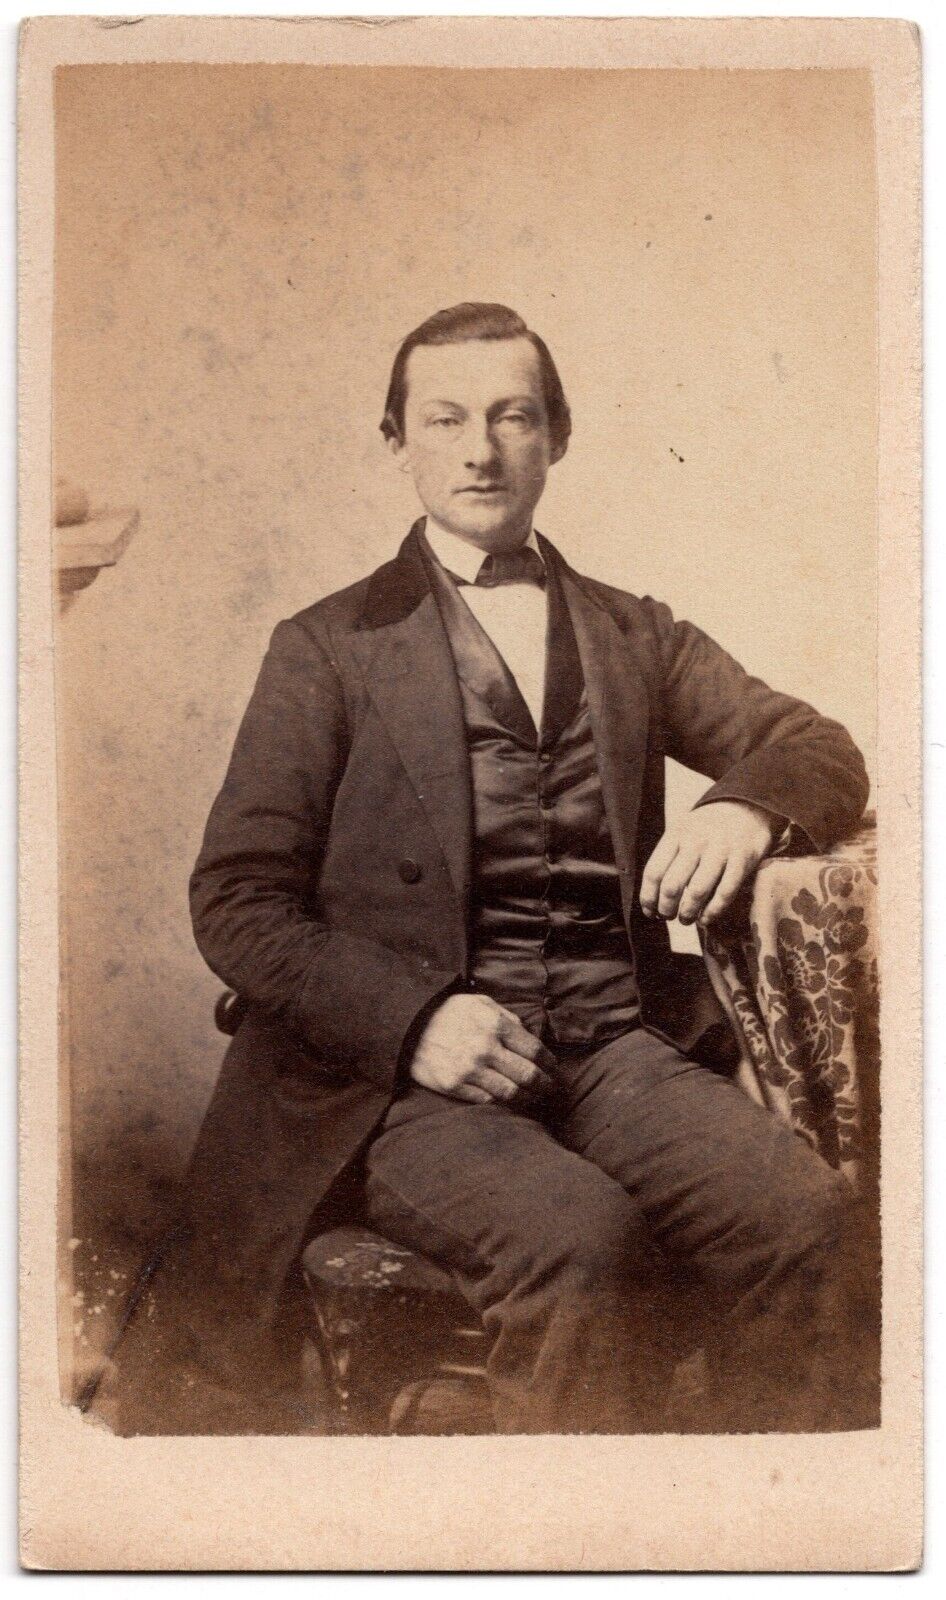 ANTIQUE CDV CIRCA 1860s ELWELL HANDSOME YOUNG MAN IN SUIT GLOUCESTER MASS.